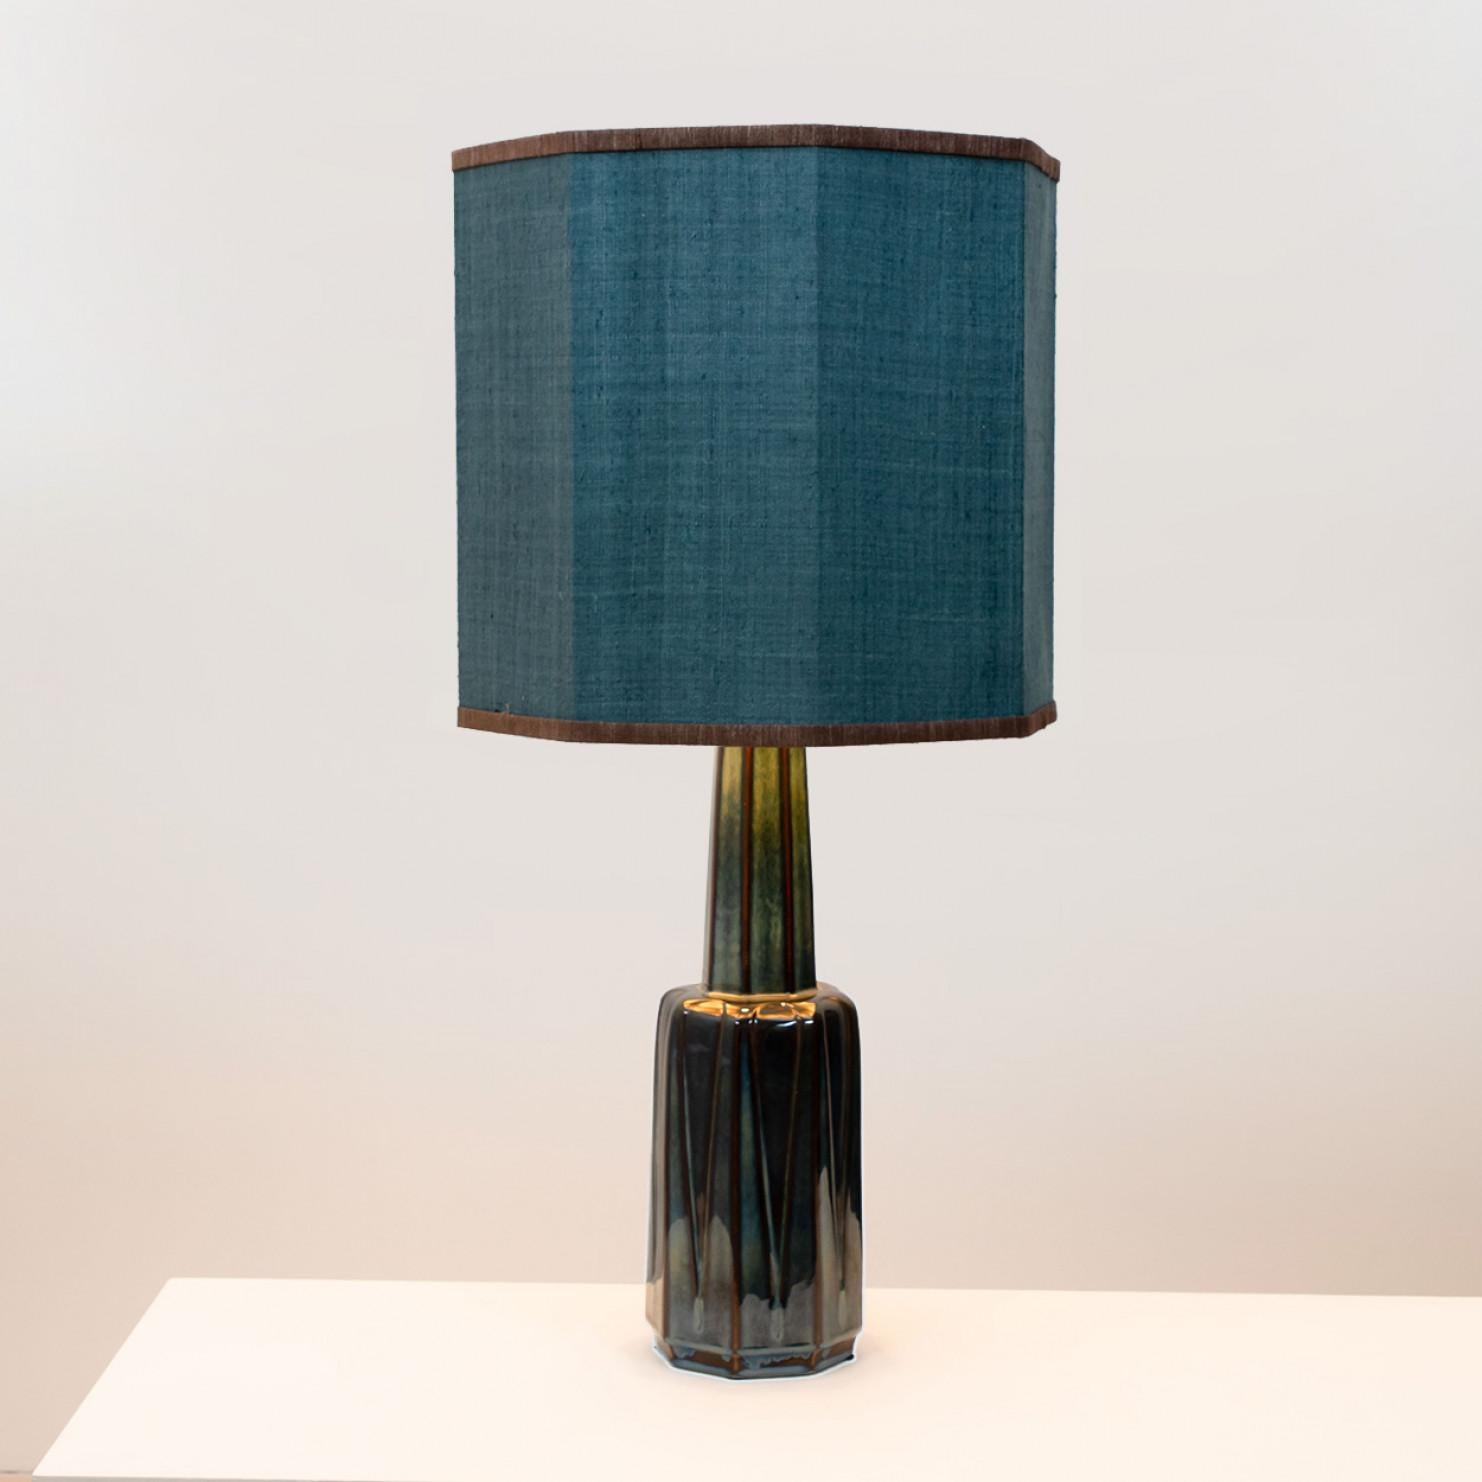 1 of the 2 Large Soholm Lamp with New Blue Silk Custom Made Lampshade Houben, 19 For Sale 2